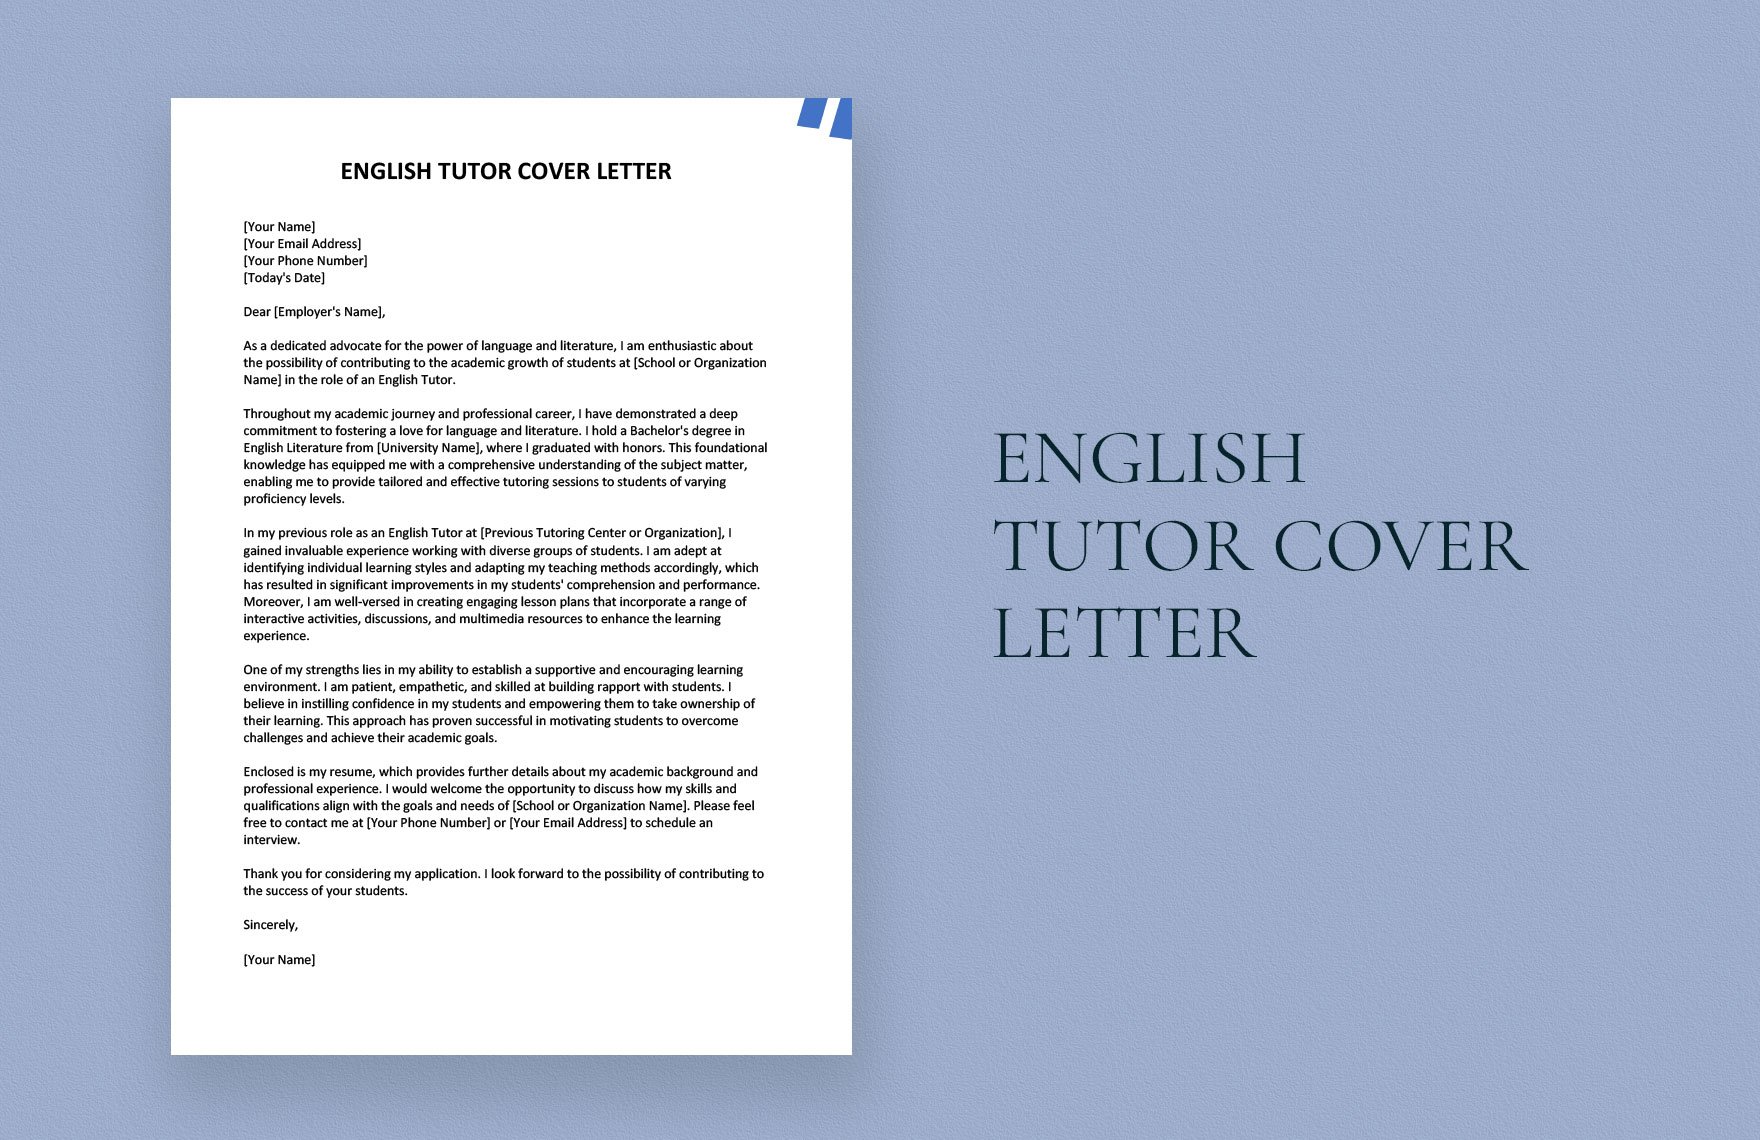 English Tutor Cover Letter